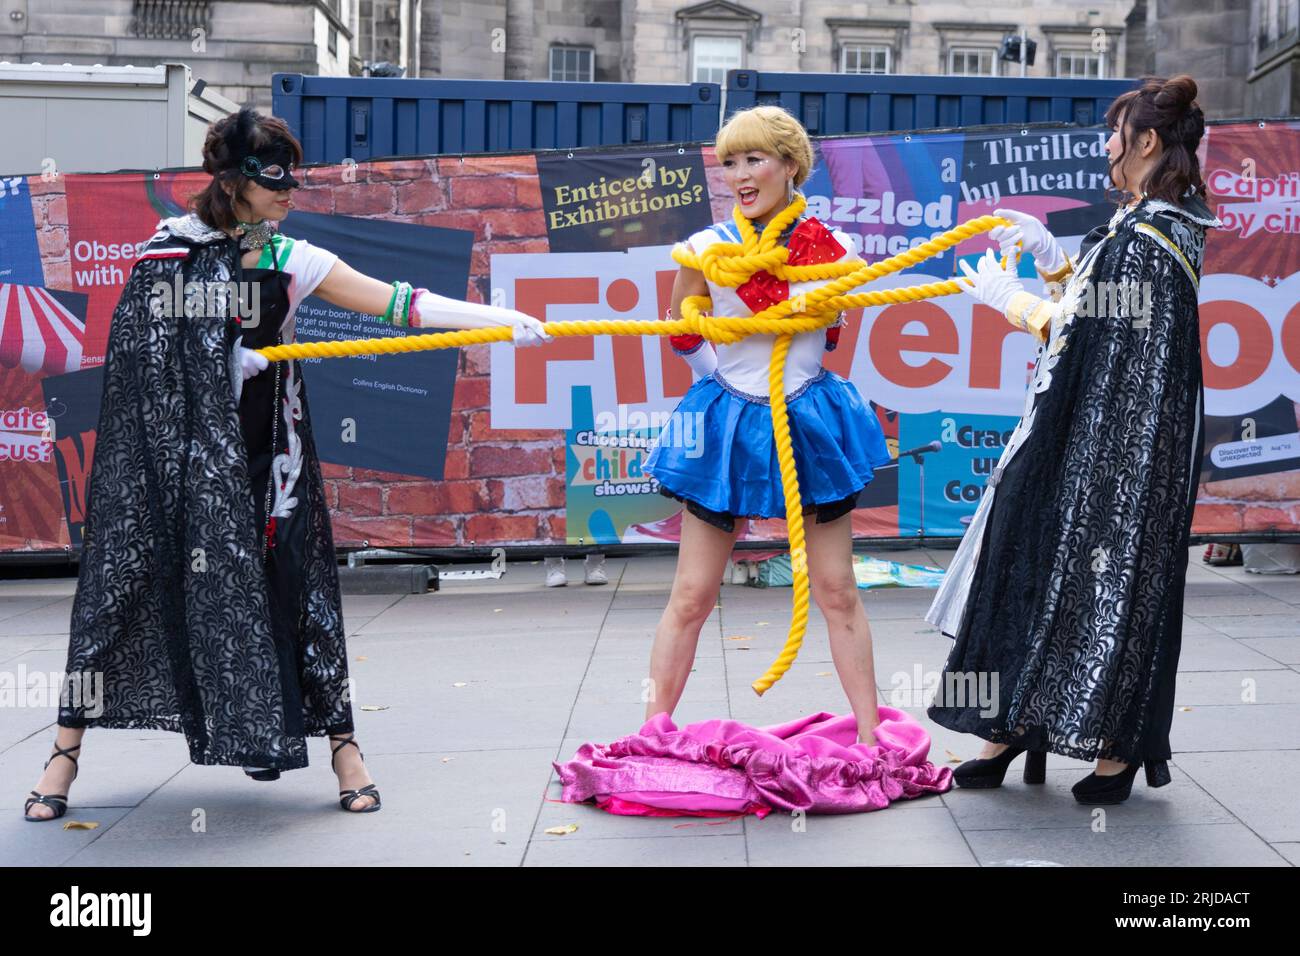 Edinburgh, Scotland, UK. 22nd August 2023. Street performers and actors promoting shows on the Royal Mile during the 3rd week of the Edinburgh Fringe Festival. Pic;  Japanese street performers the Teriyaki Girls entertain the public on the Royal Mile. Iain Masterton/Alamy Live News Stock Photo